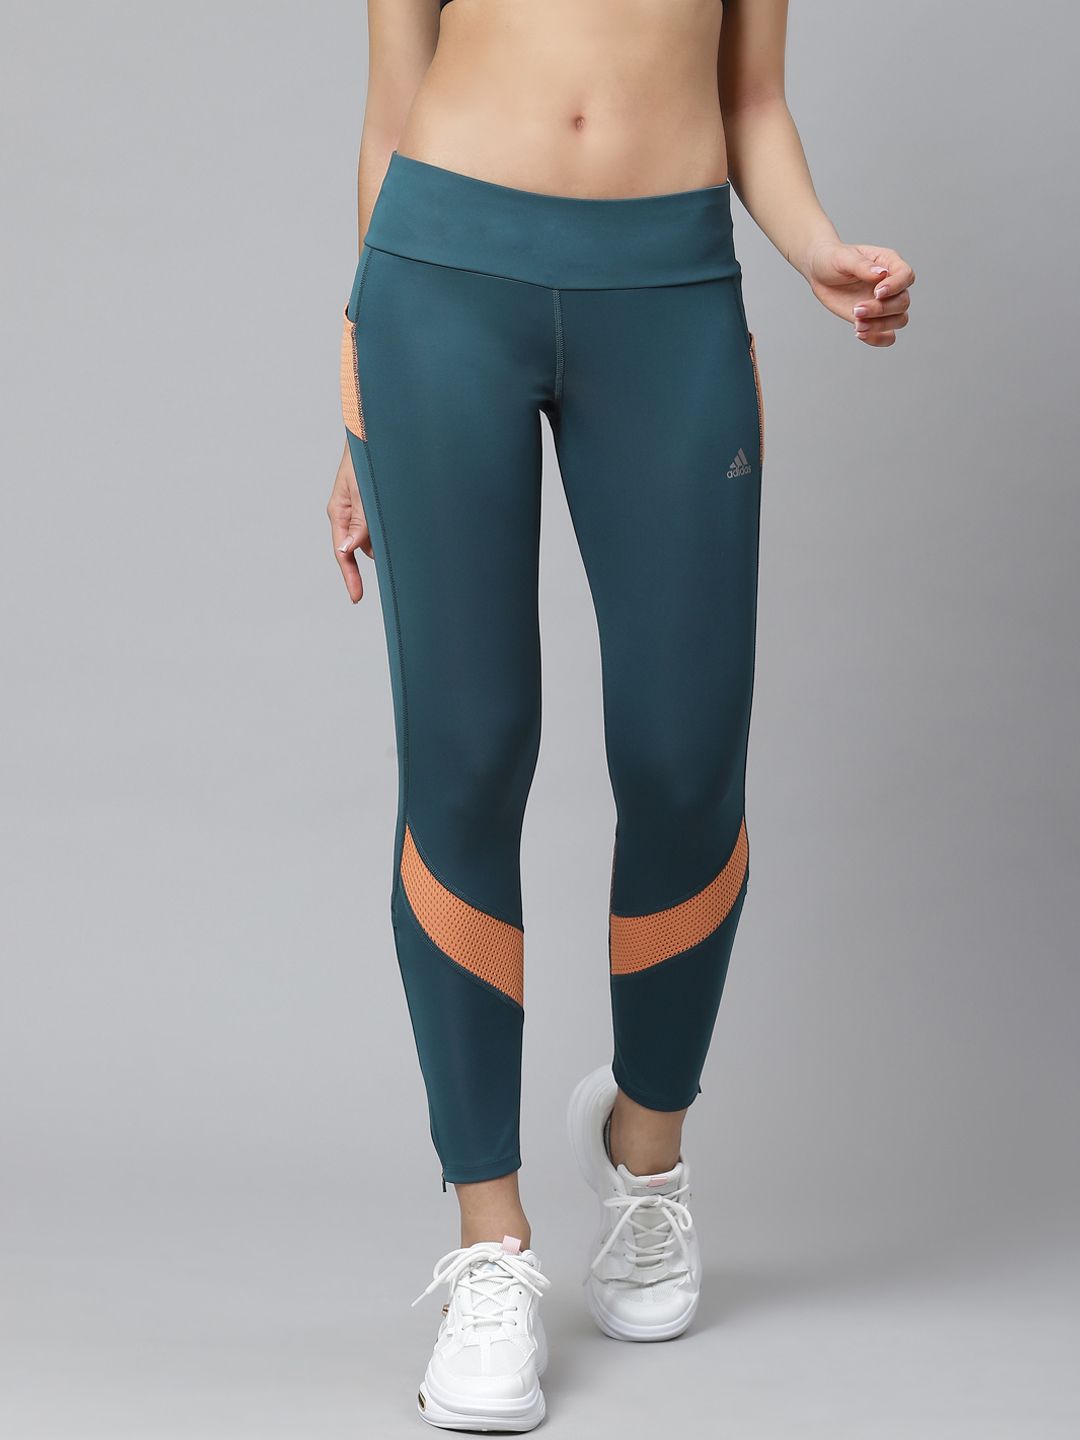 ADIDAS Women Teal Blue Printed OWN THE Running Tights Price in India